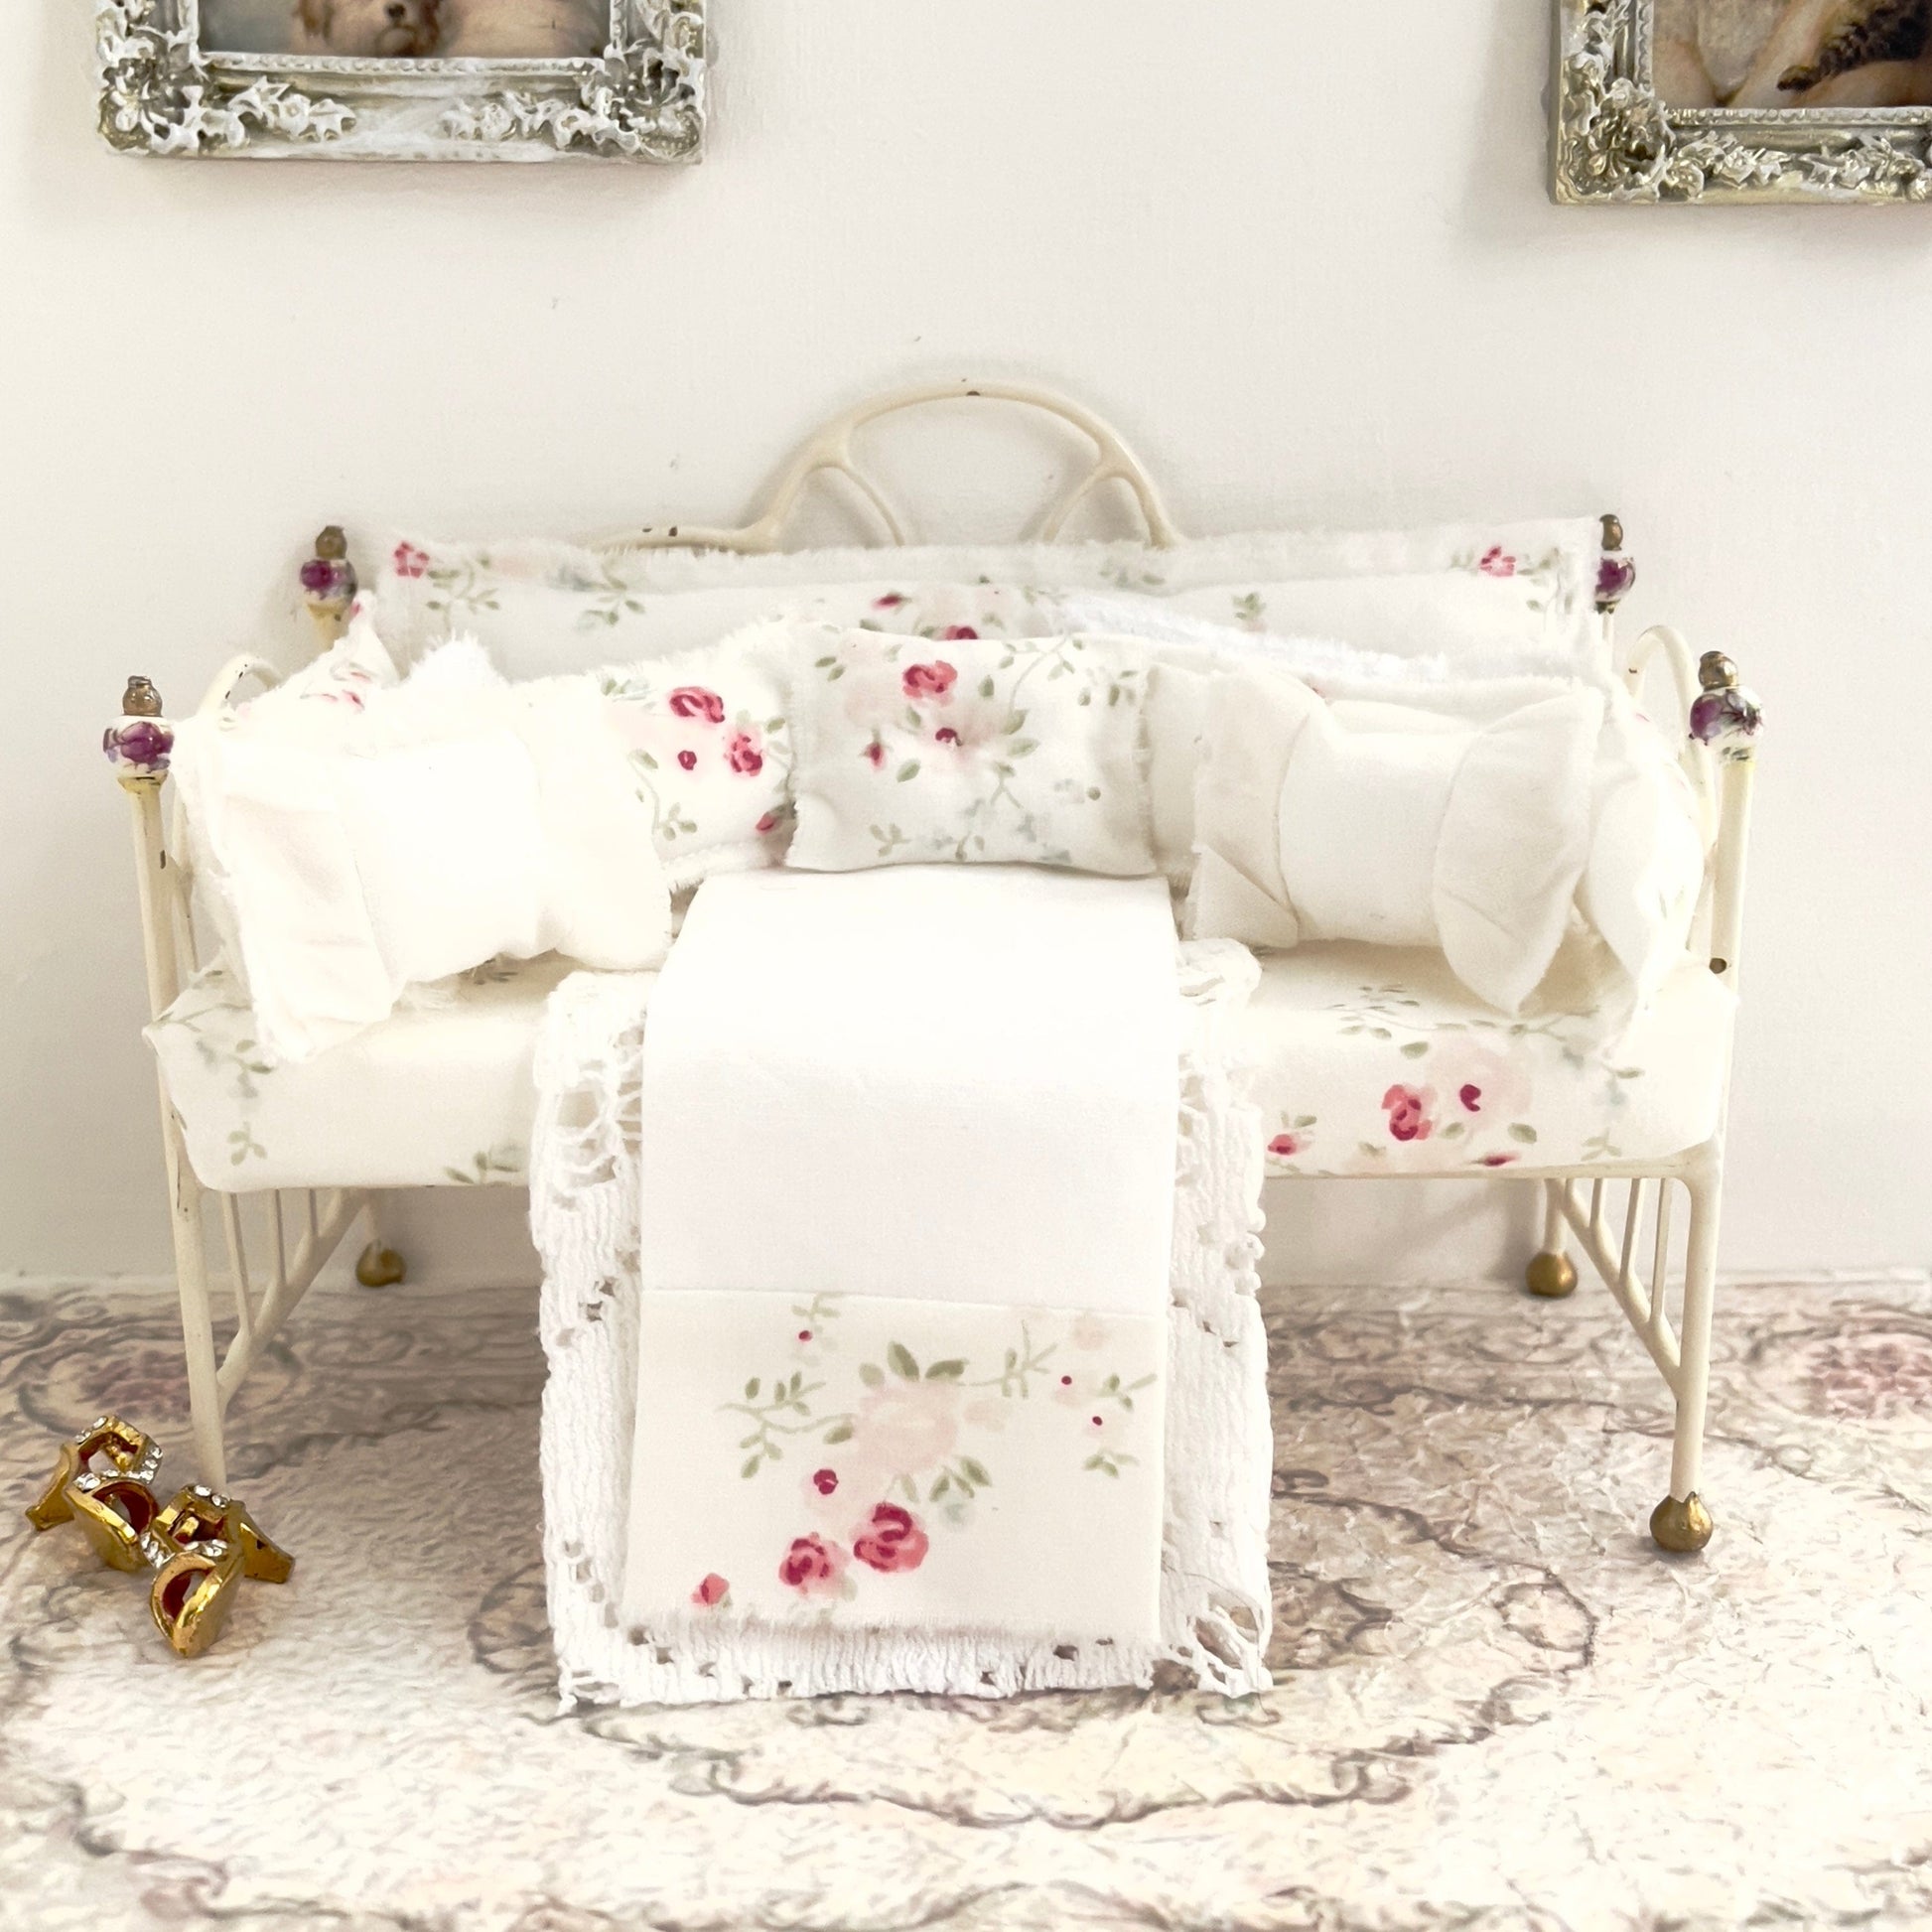 Chantallena Doll House Bedding Day Bed | Shabby Pink Roses with White Cotton Lace Throw Set | Floral Clusters